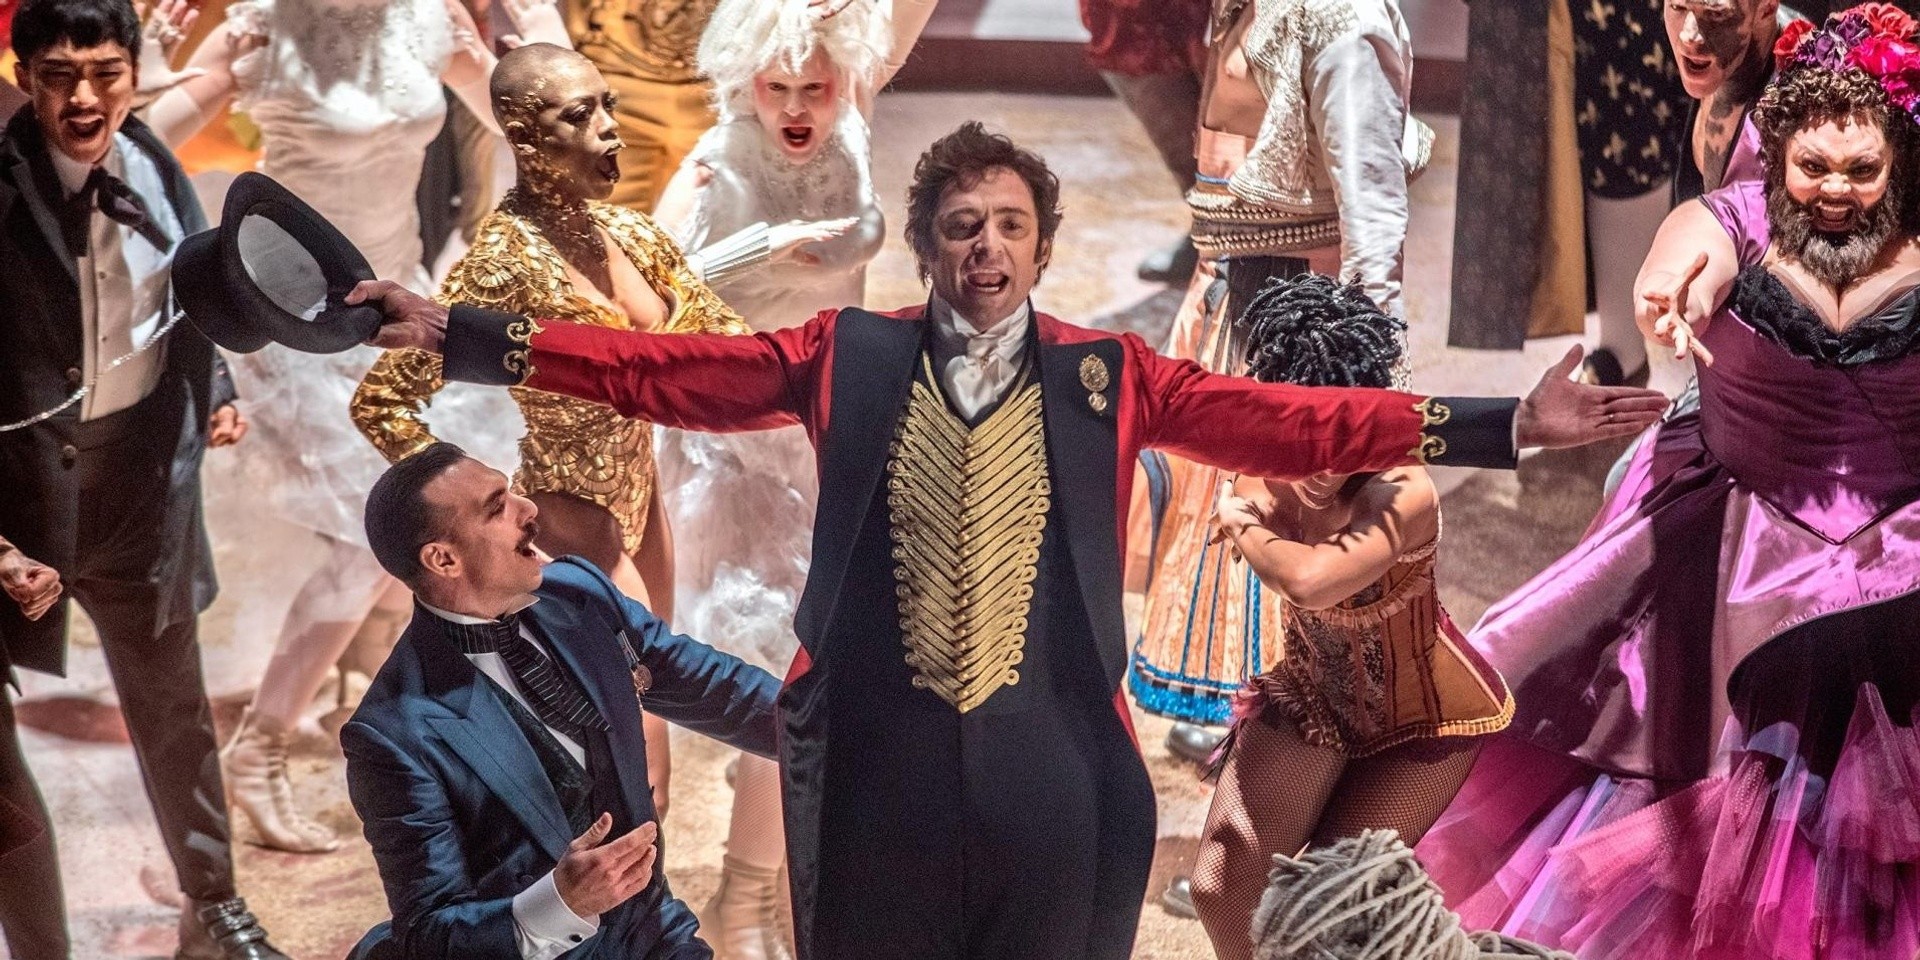 The Greatest Showman's soundtrack is the best-selling album of 2018 so far